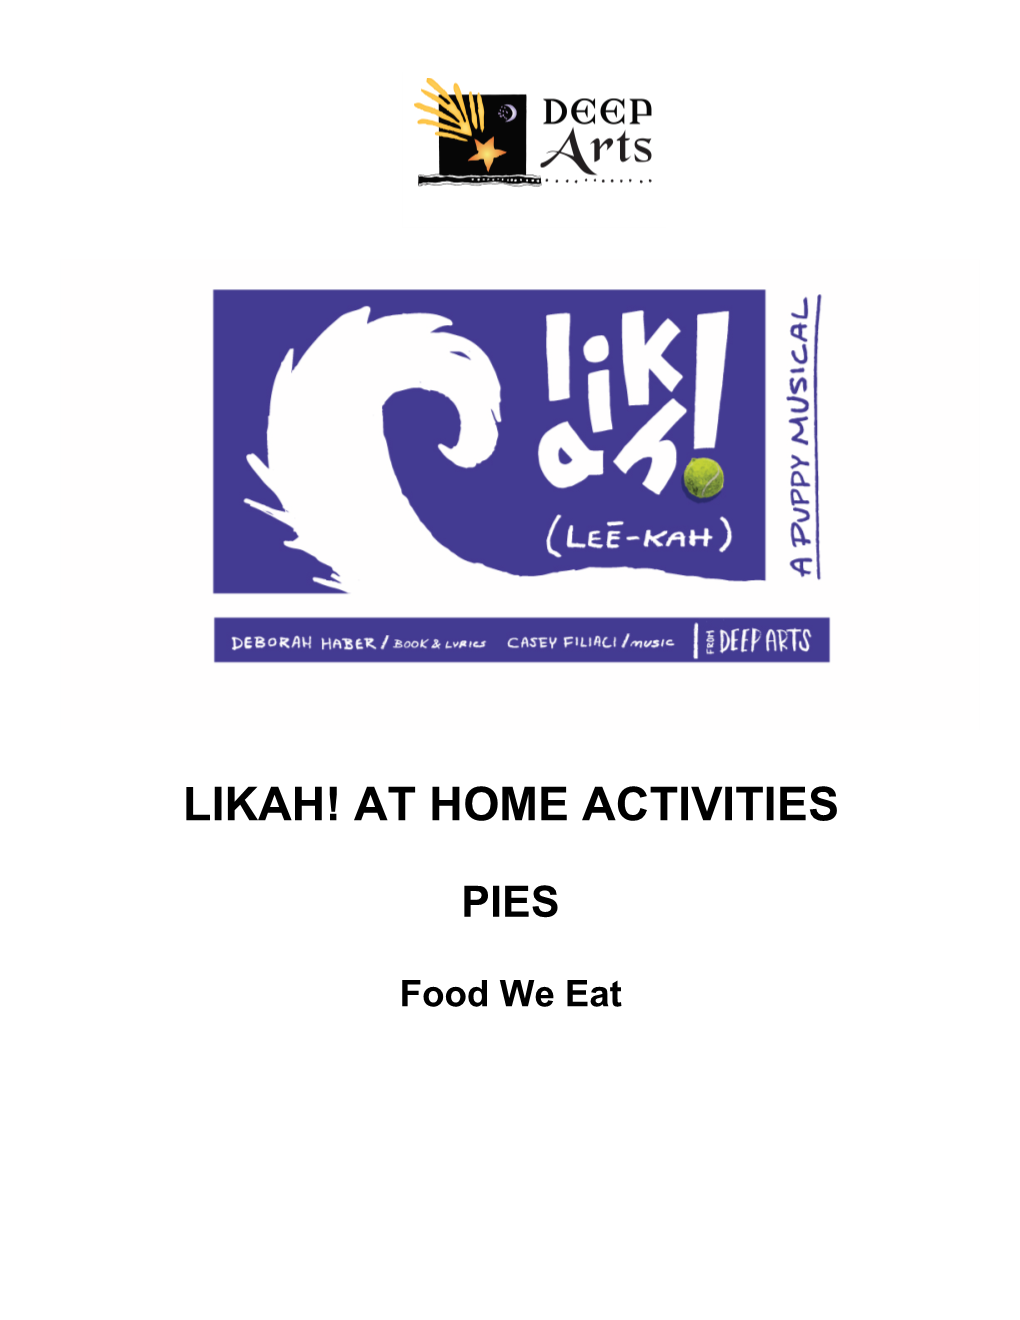 Pies at Home Activities